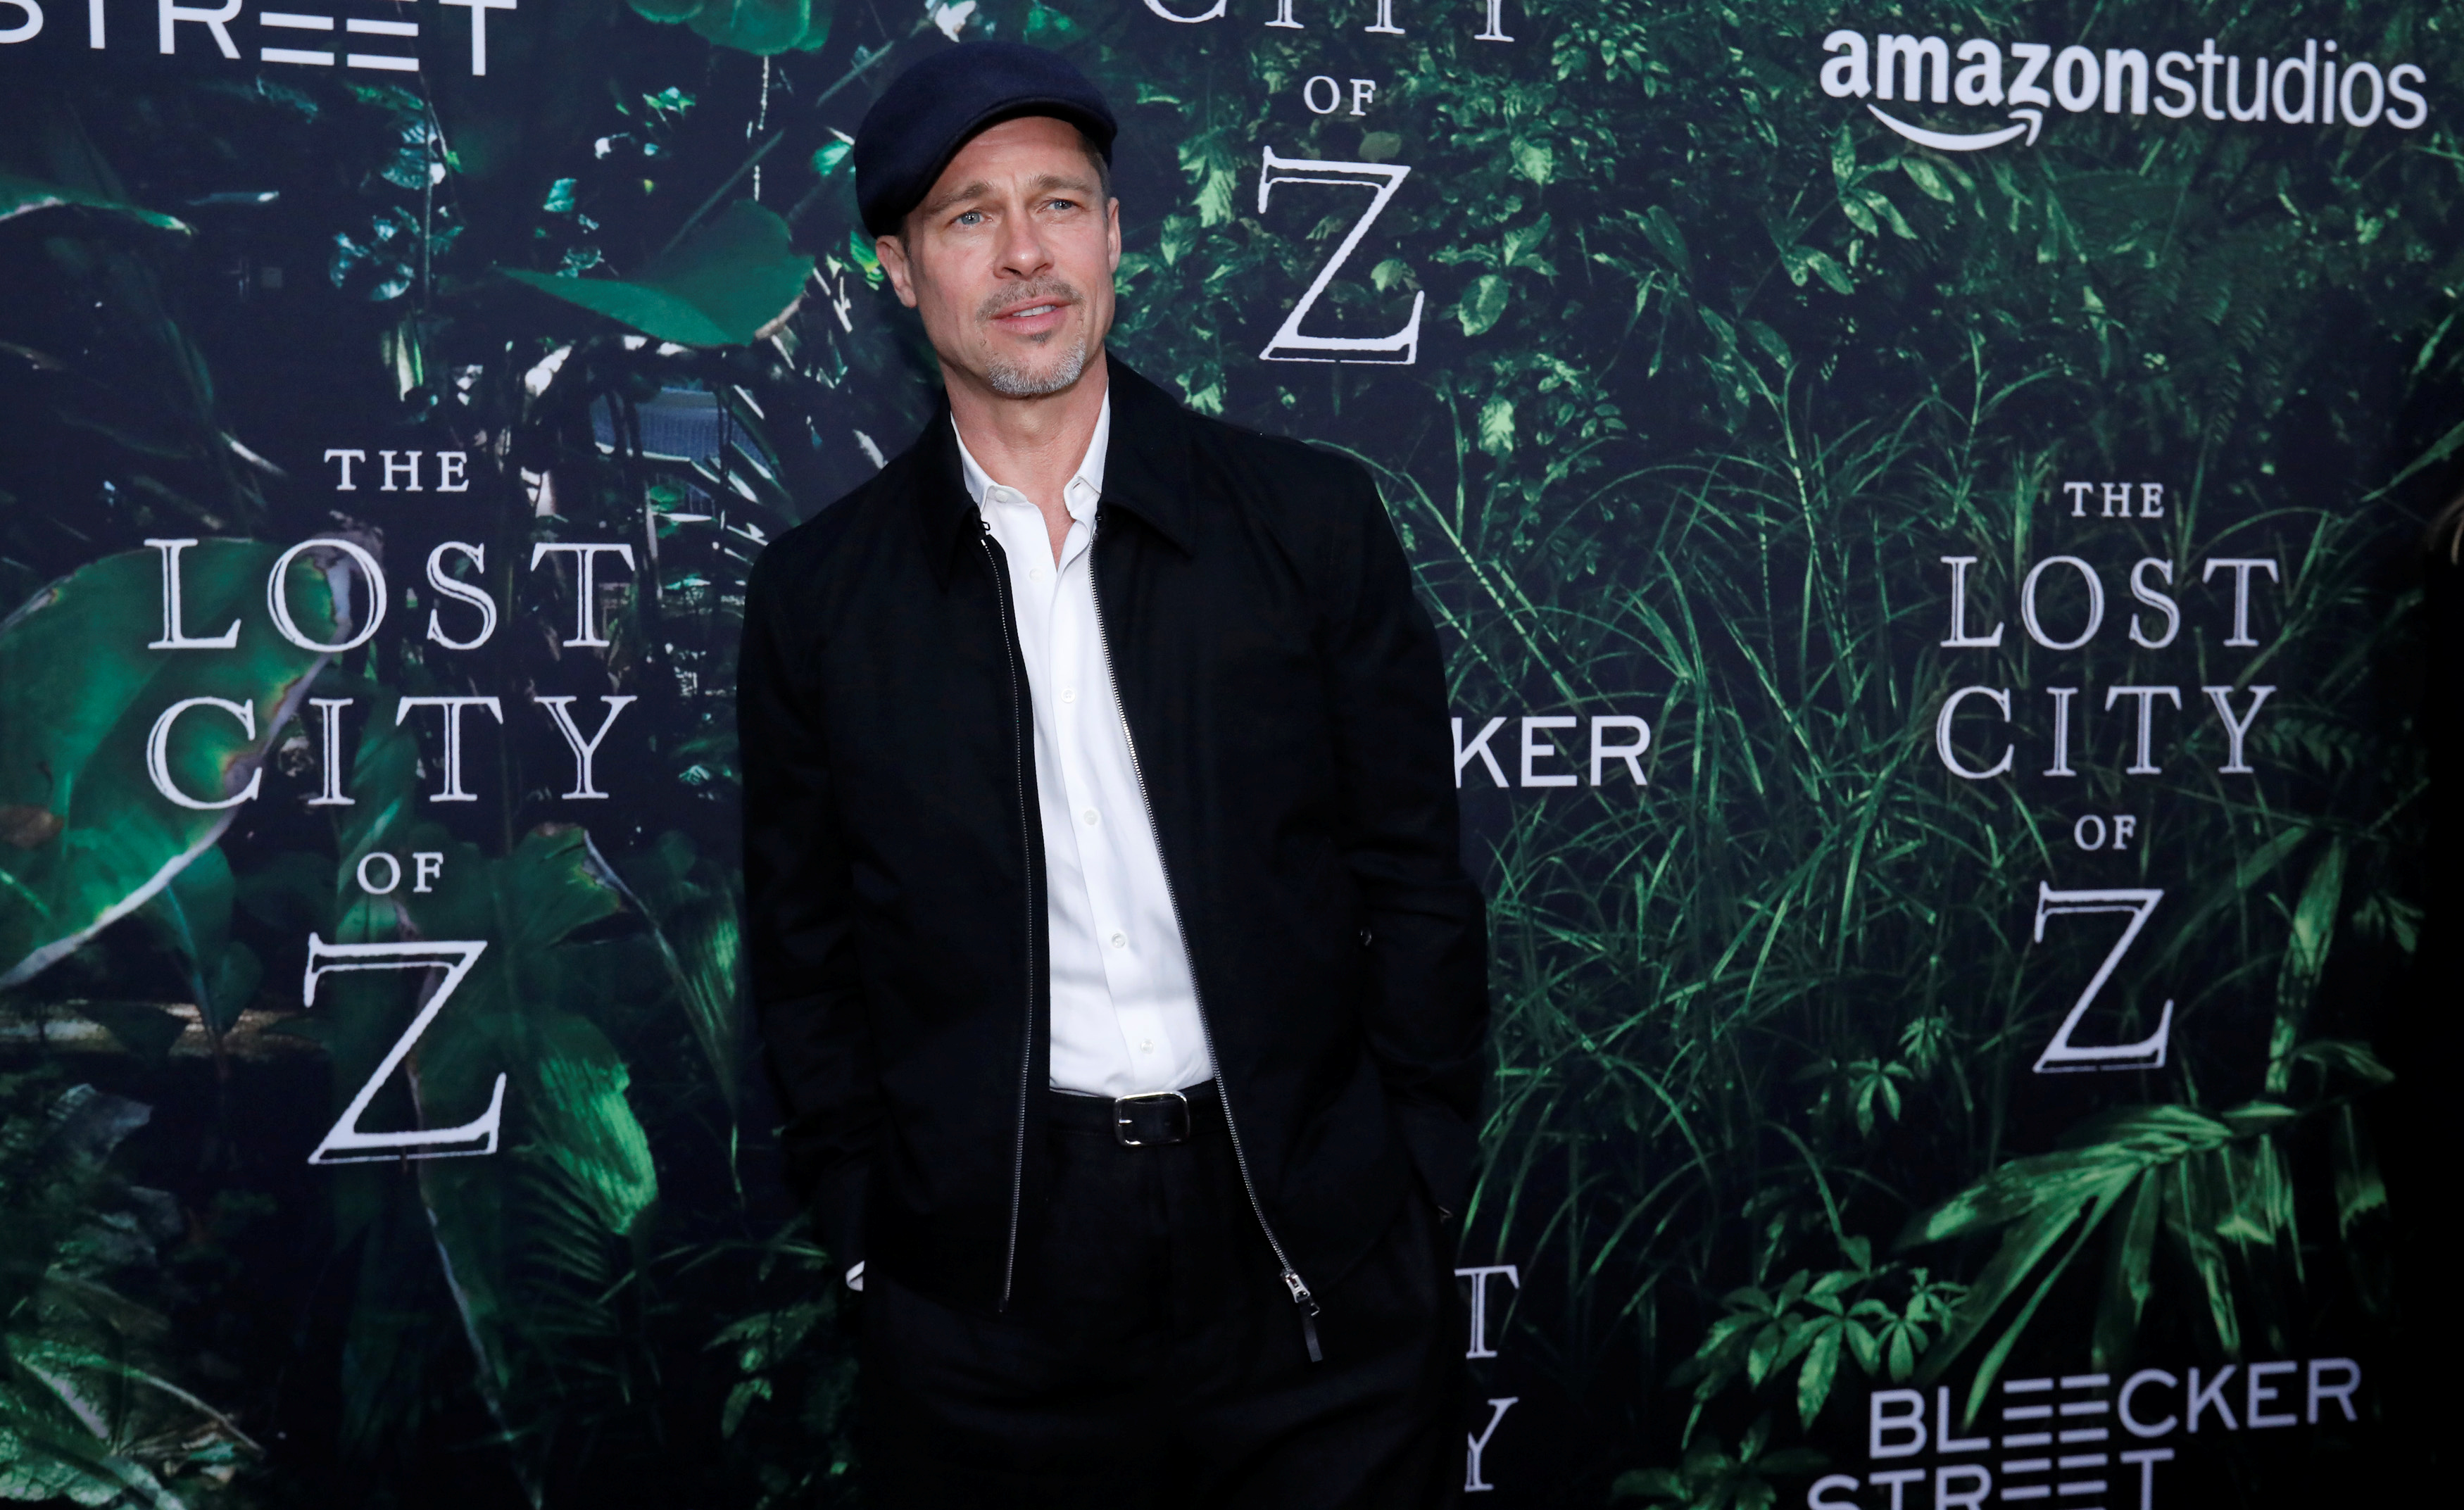 Producer Brad Pitt poses at the premiere of the movie "The Lost City of Z" in Los Angeles, California U.S., April 5, 2017.   REUTERS/Mario Anzuoni - RC16928D76C0